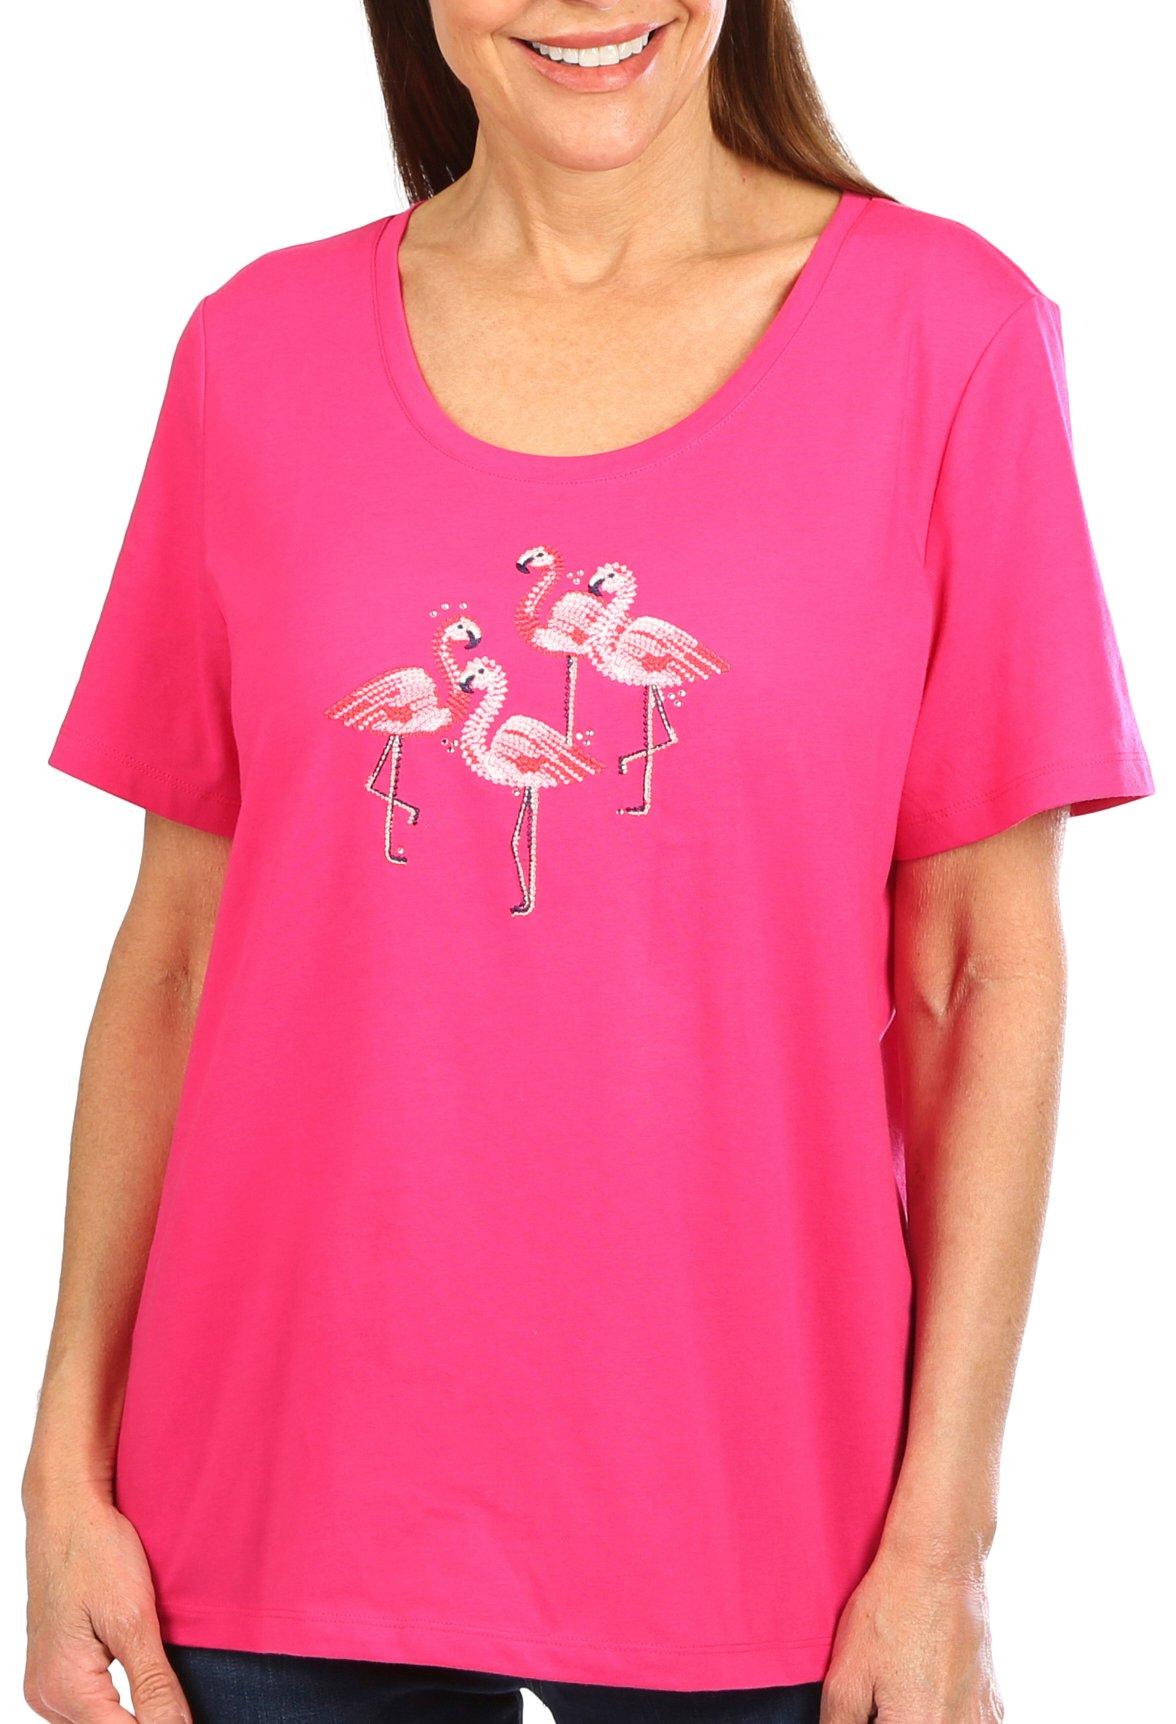 Womens Embroidered Flamingo Short Sleeve Top